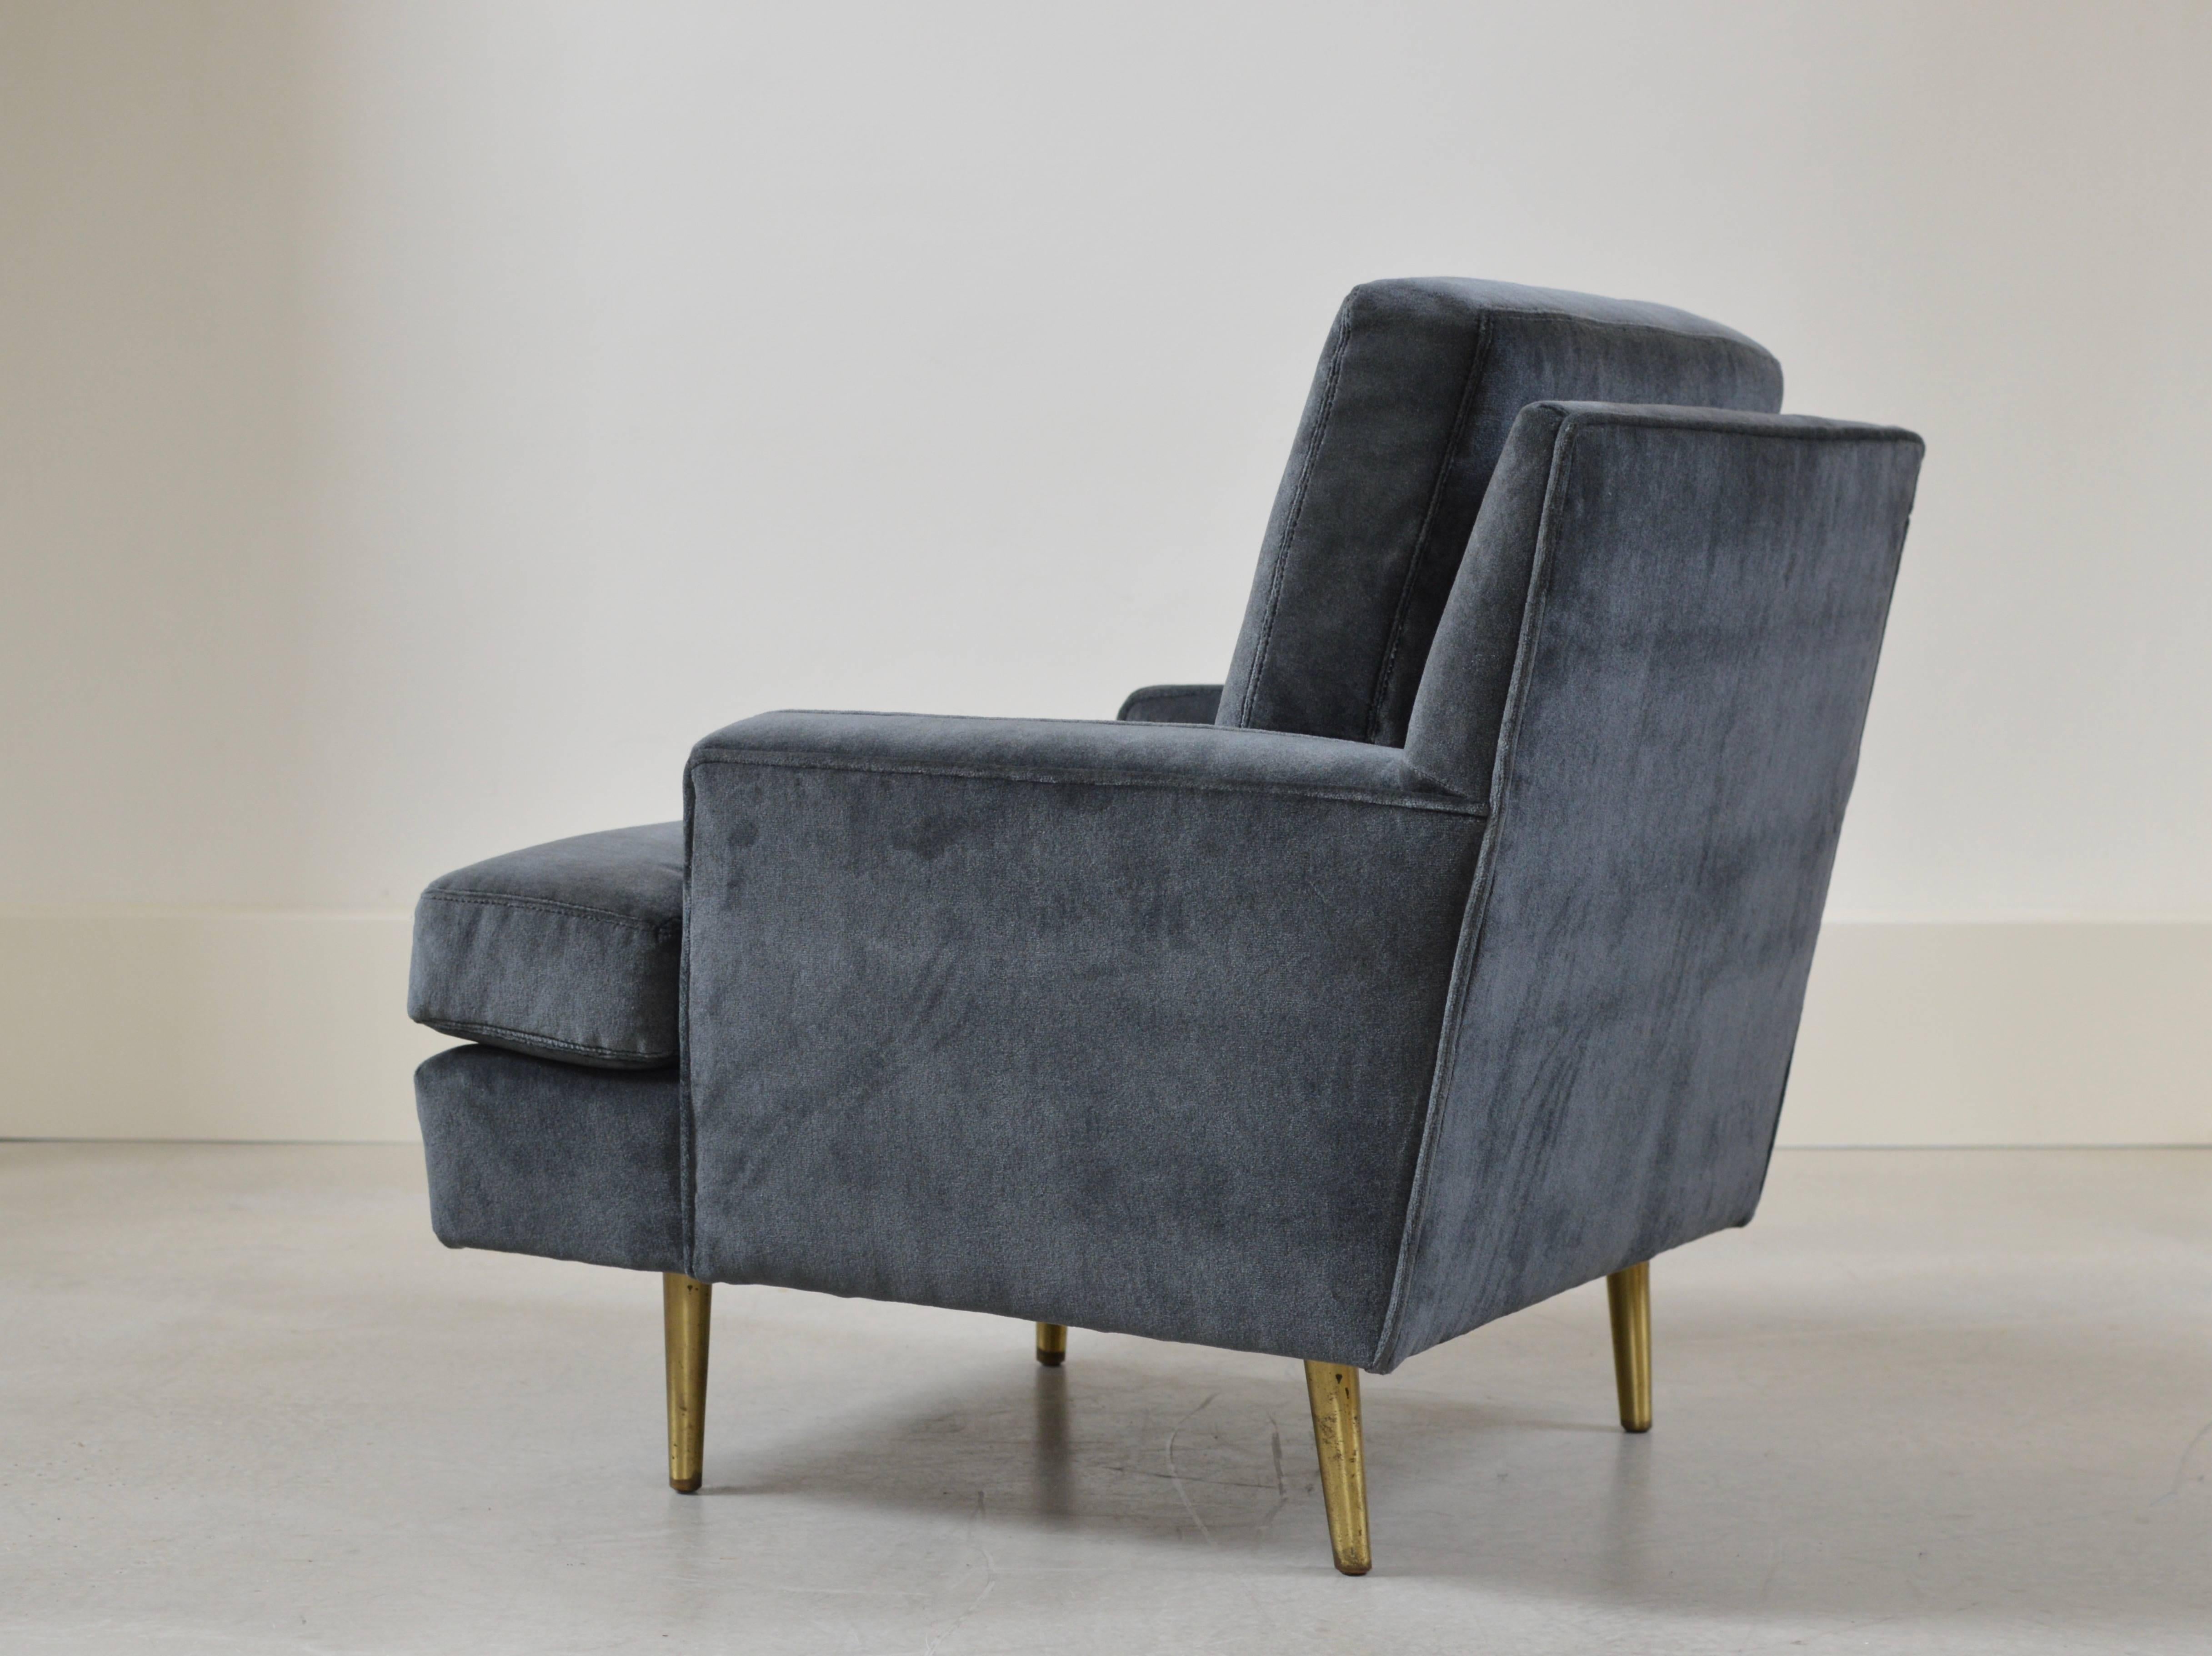 Early 1950s armchair model 4907-1 by Edward Wormley for Dunbar with brass legs. Armchair is fully restored and re-upholstered the a wonderful rich mohair fabric and comes with the original early Dunbar label to underside. 

A wonderful